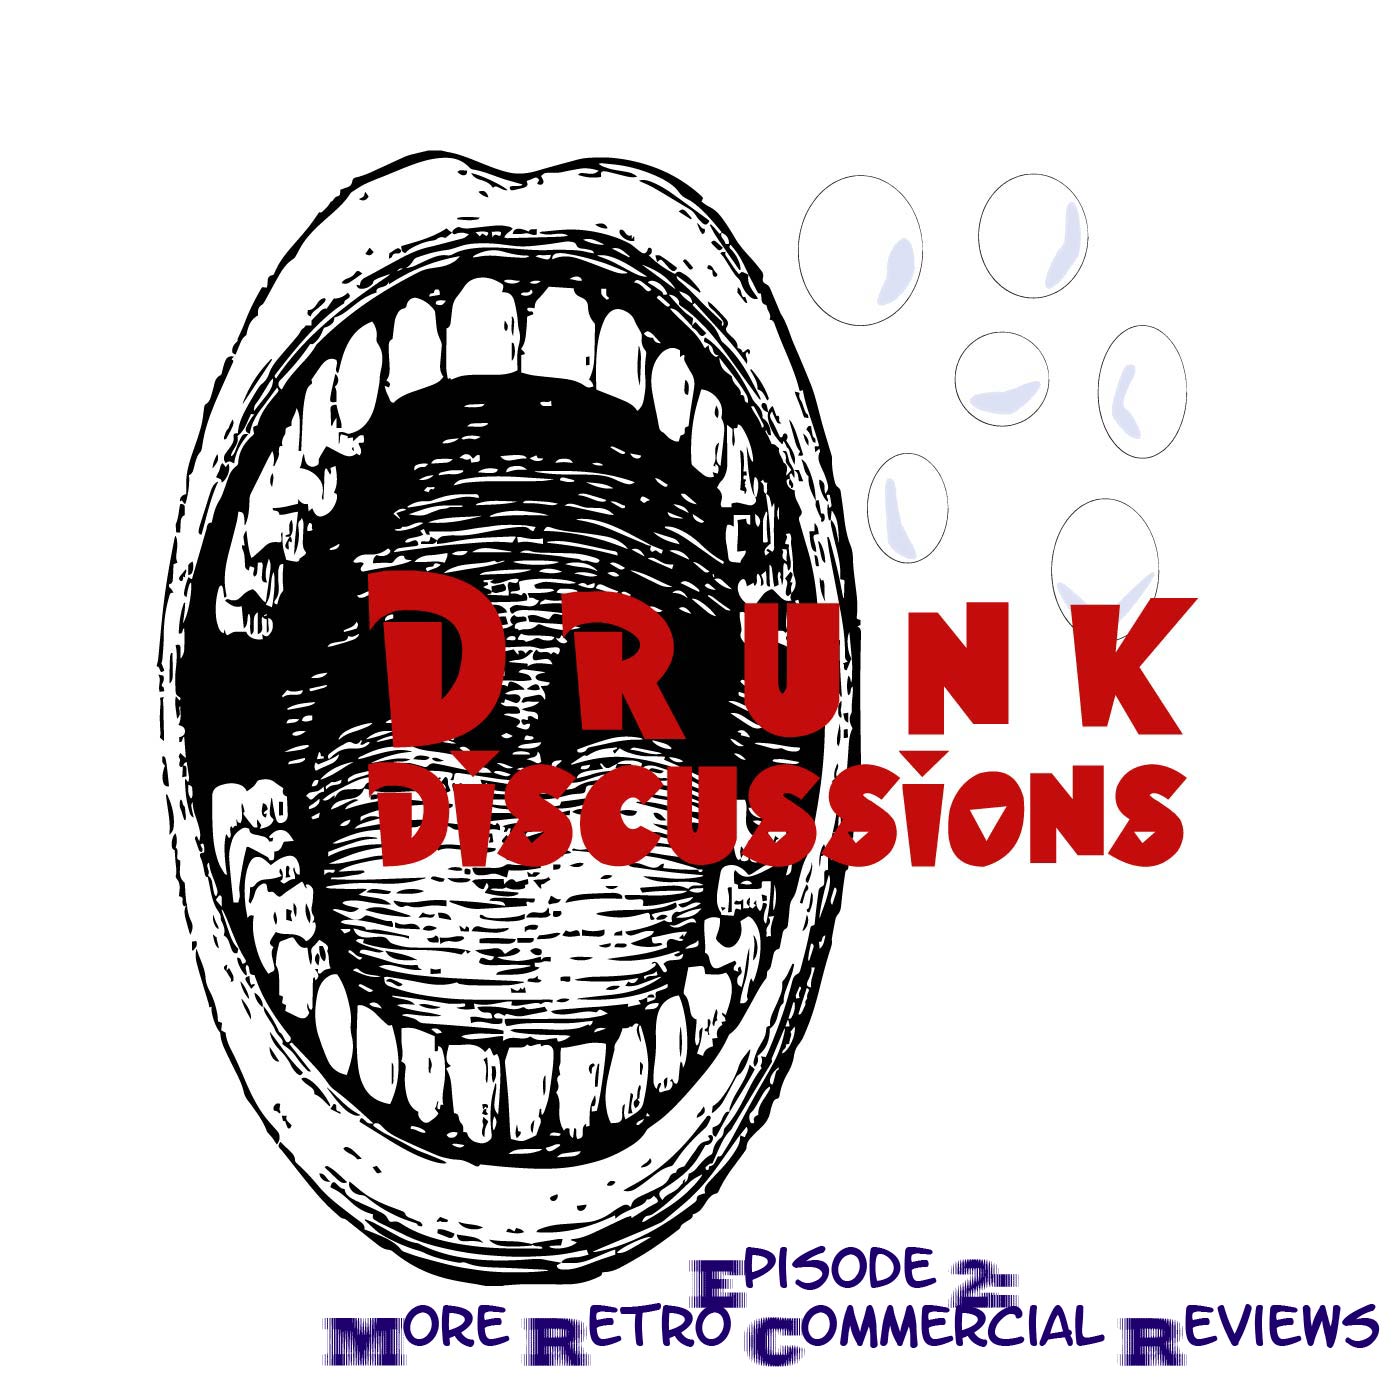 Drunk Discussions Episode 2: MORE Retro Commercials Review